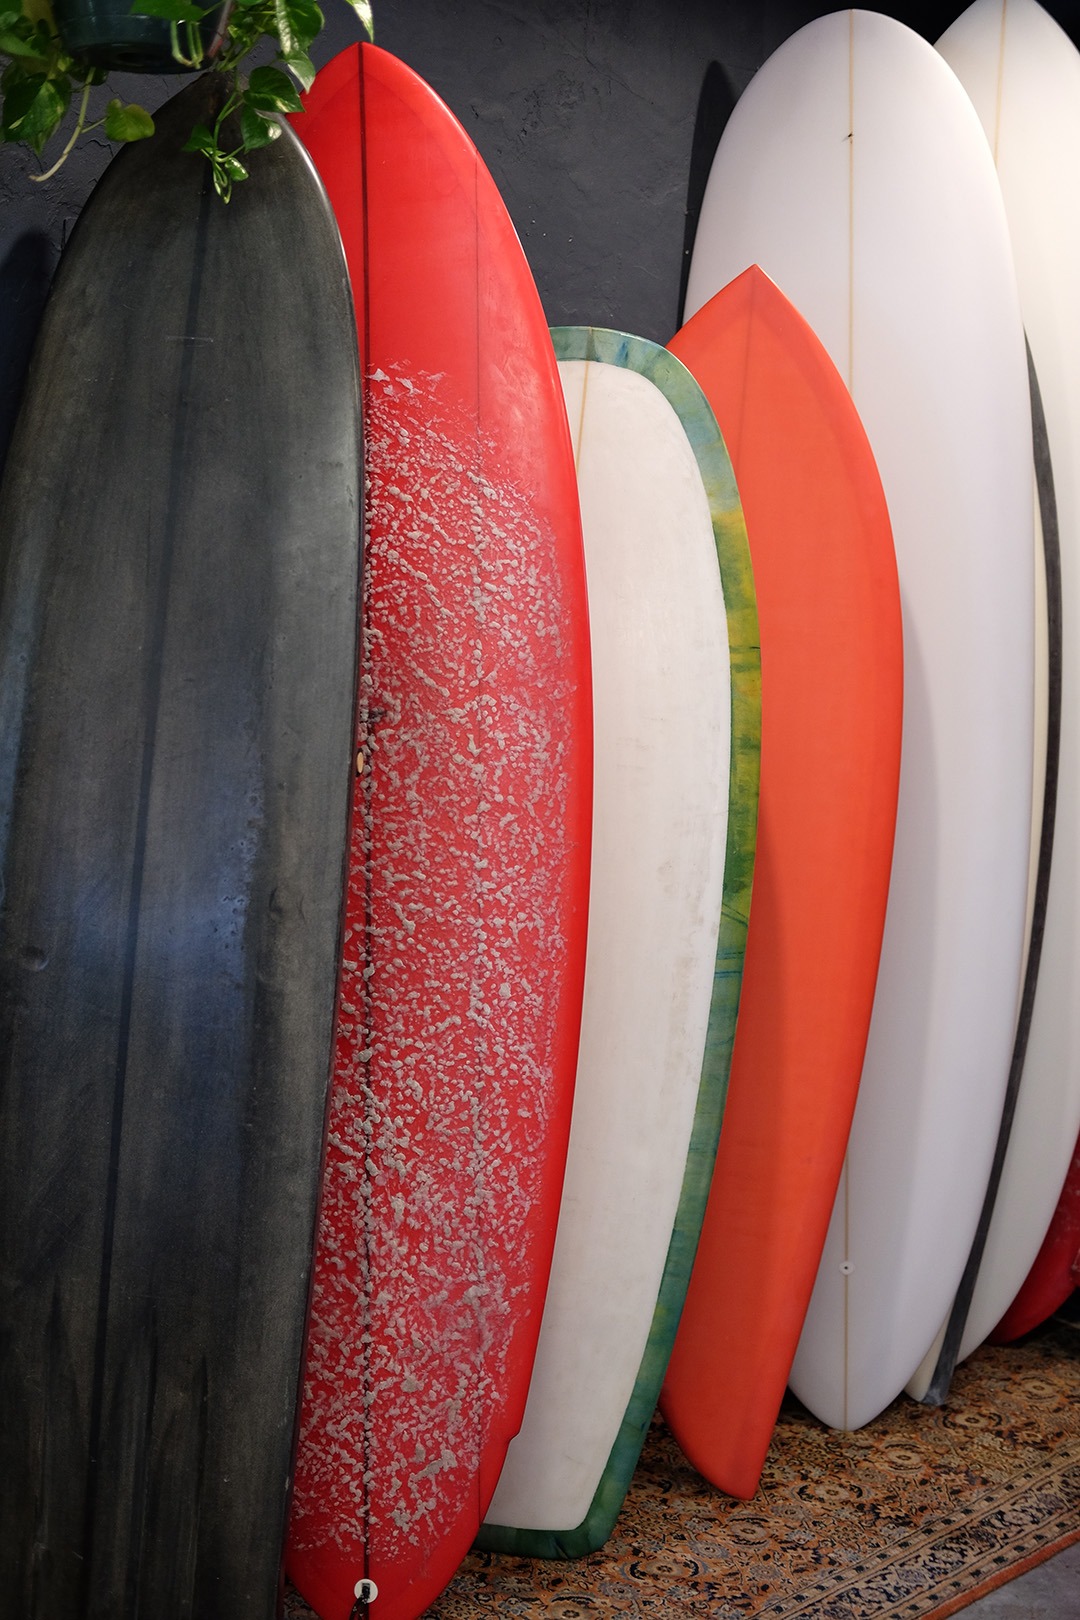 Some of Joe's latest surfboards on display. 